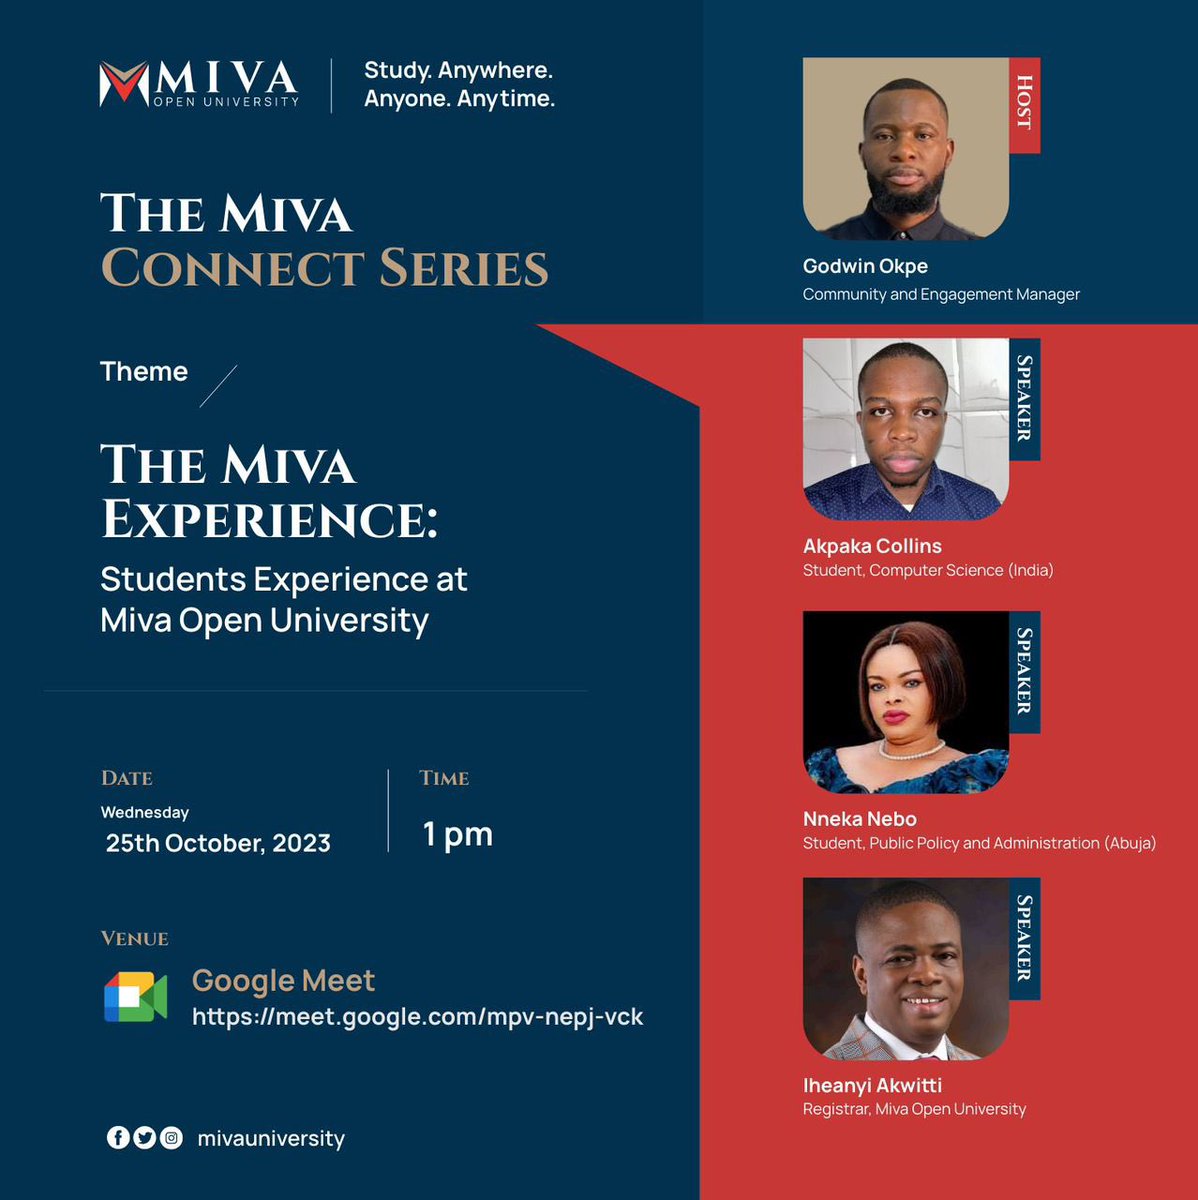 Join us on 25th October, 2023 at the Miva Connect Series Webinar to gain insights into the Miva student experience and a glimpse of our global community.

This webinar is open to everyone. To register, please visit - tinyurl.com/miva-experience

#MivaConnectSeries #StudyatMiva